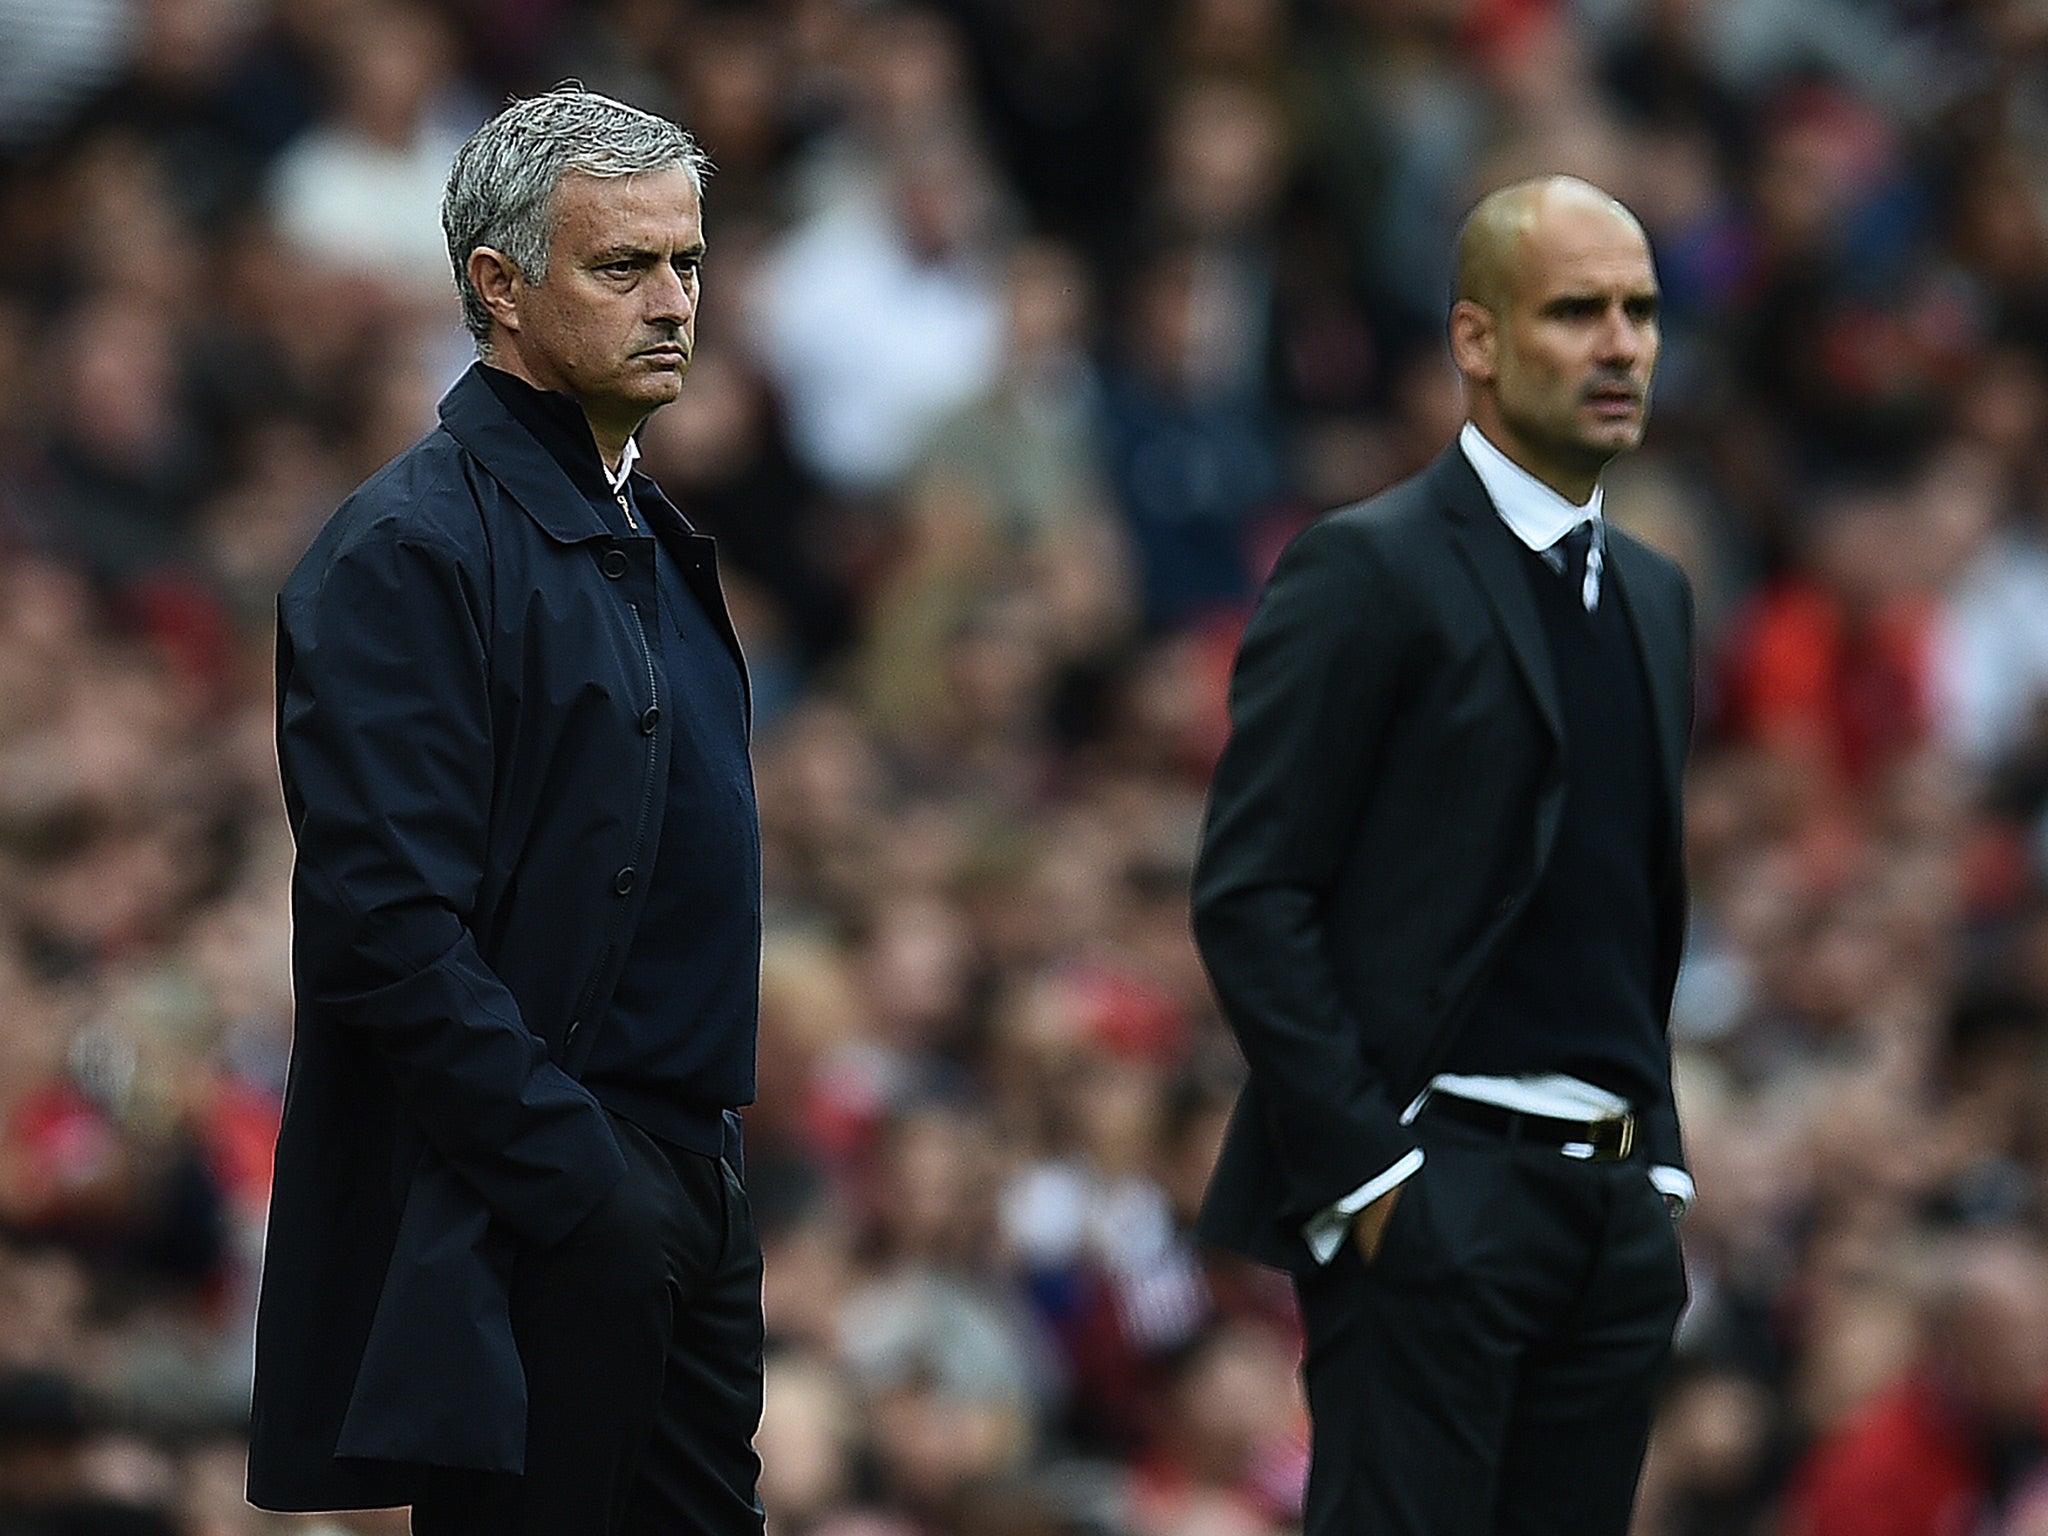 Jose Mourinho enjoyed a healthy rivalry with Pep Guardiola during their time together in La Liga